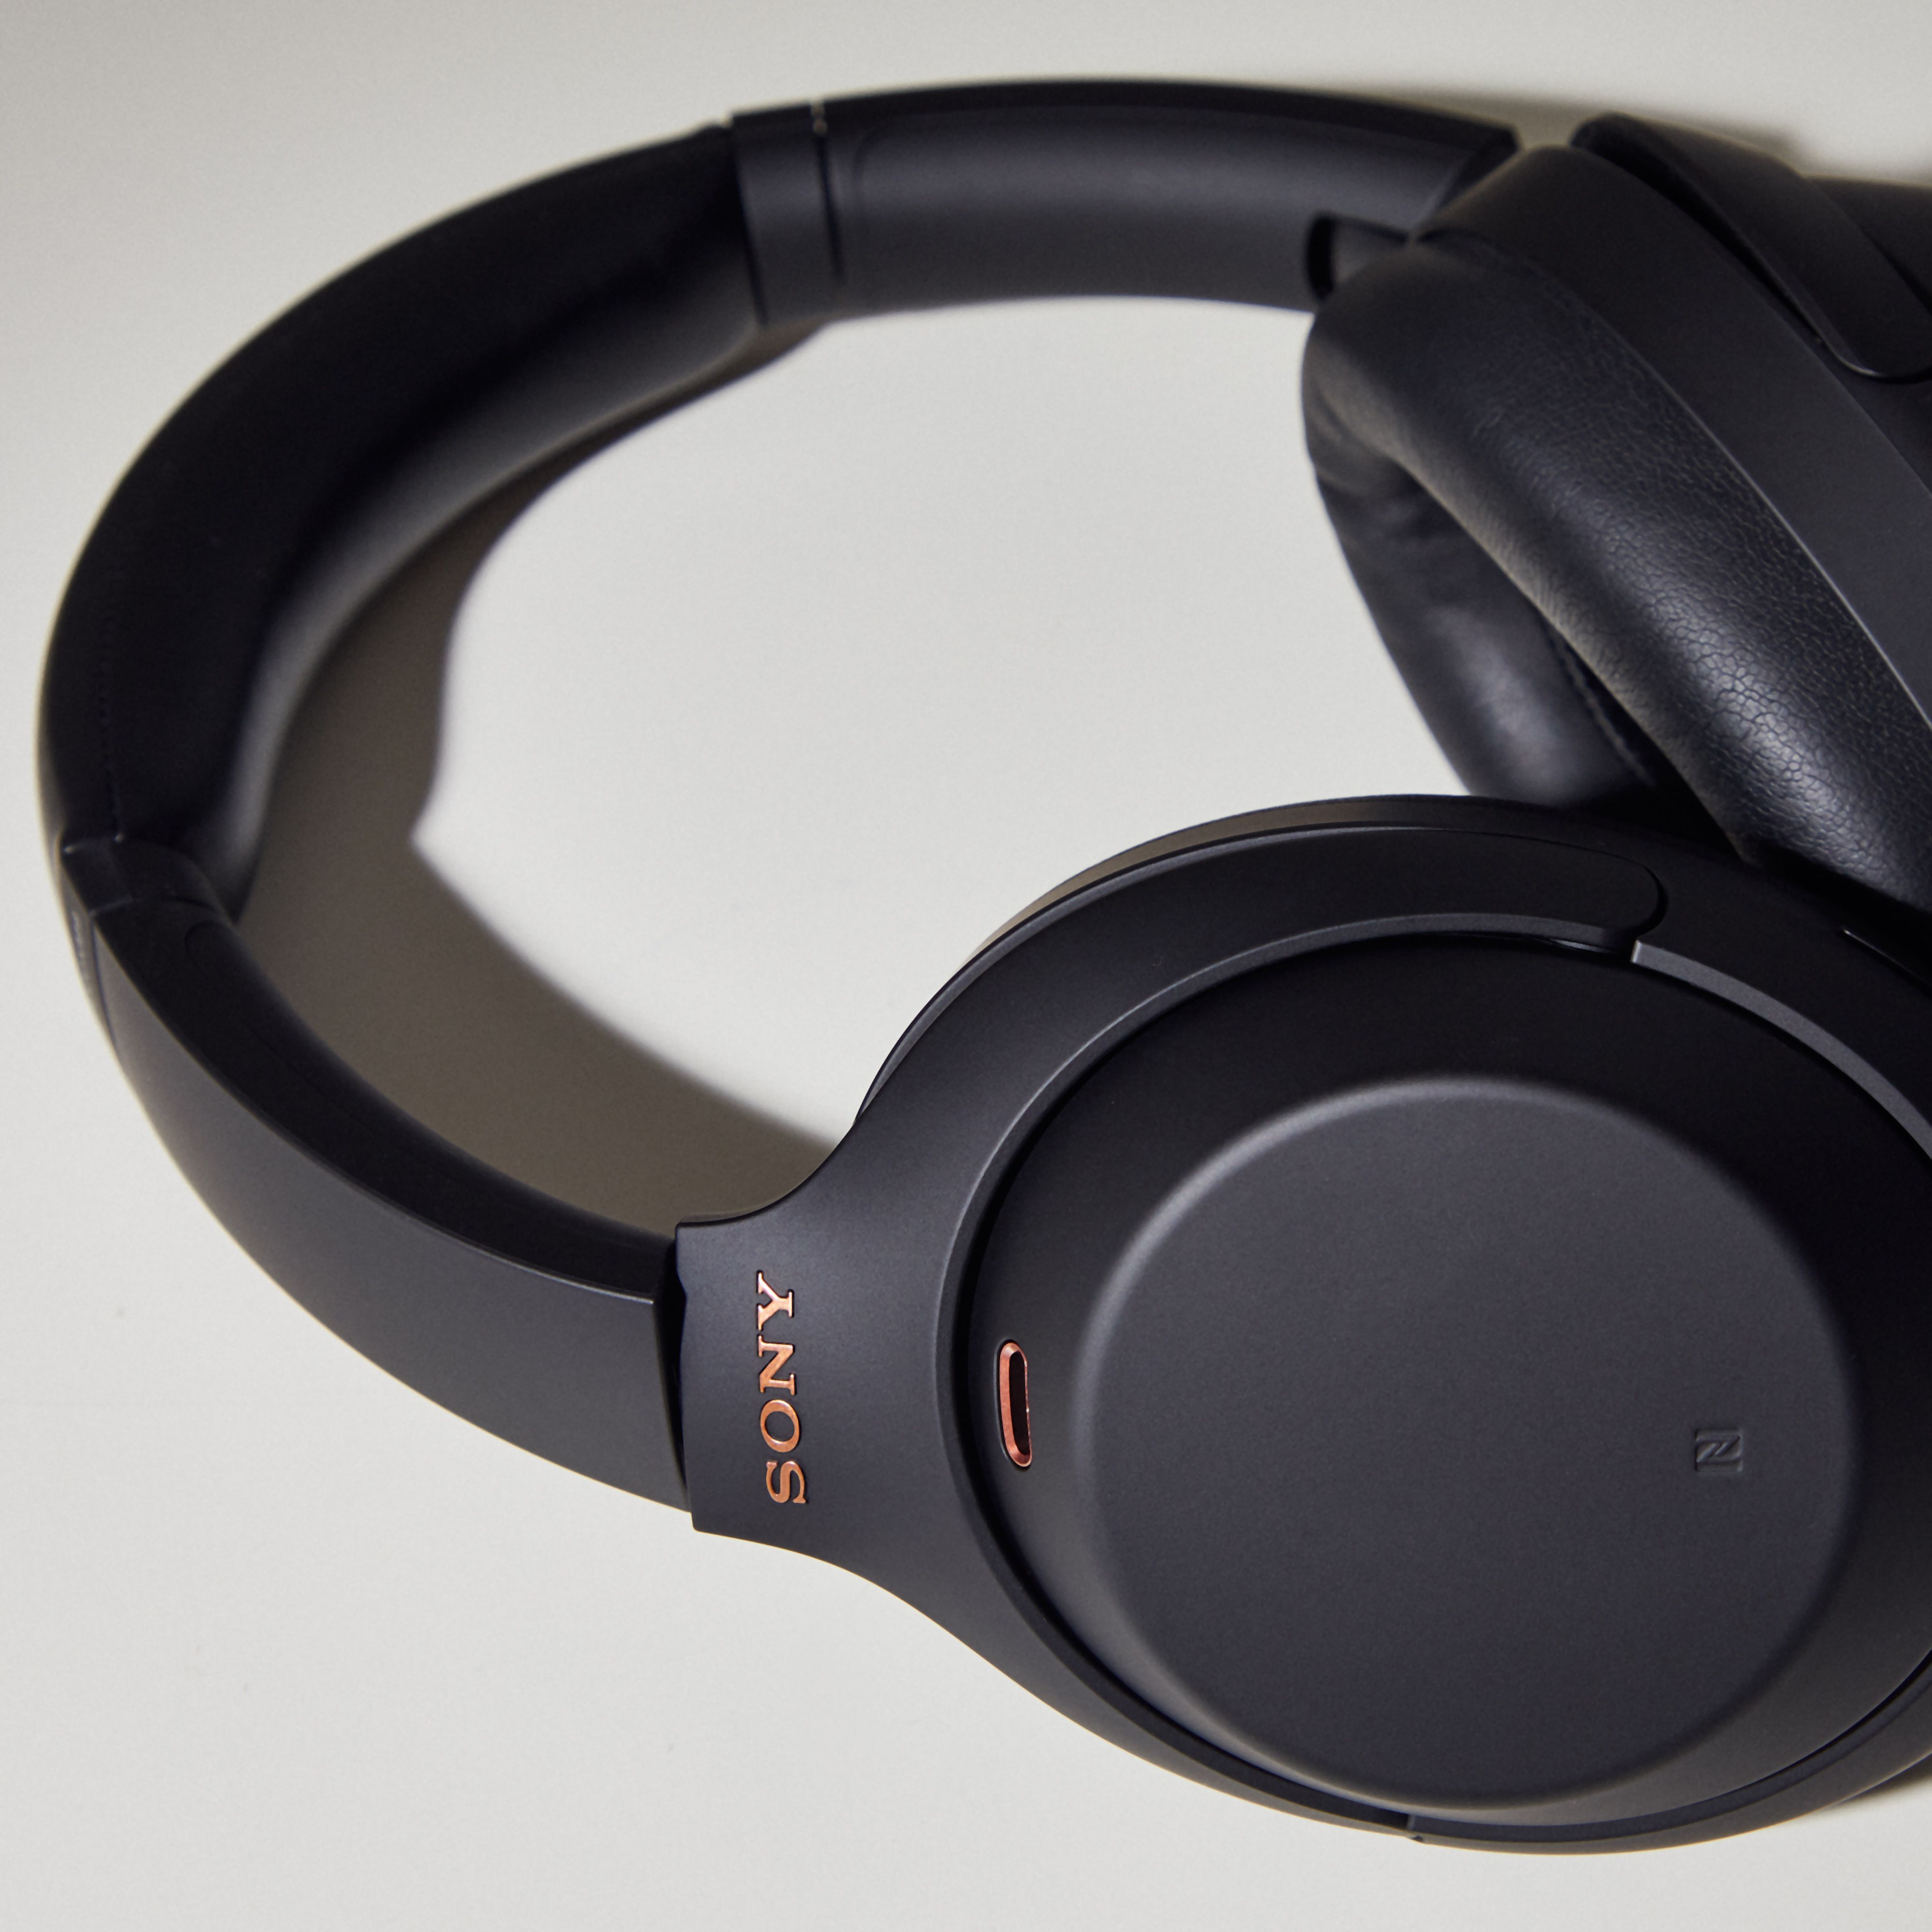 Sony WH-1000XM4 Wireless Noise Canceling Headphones Review